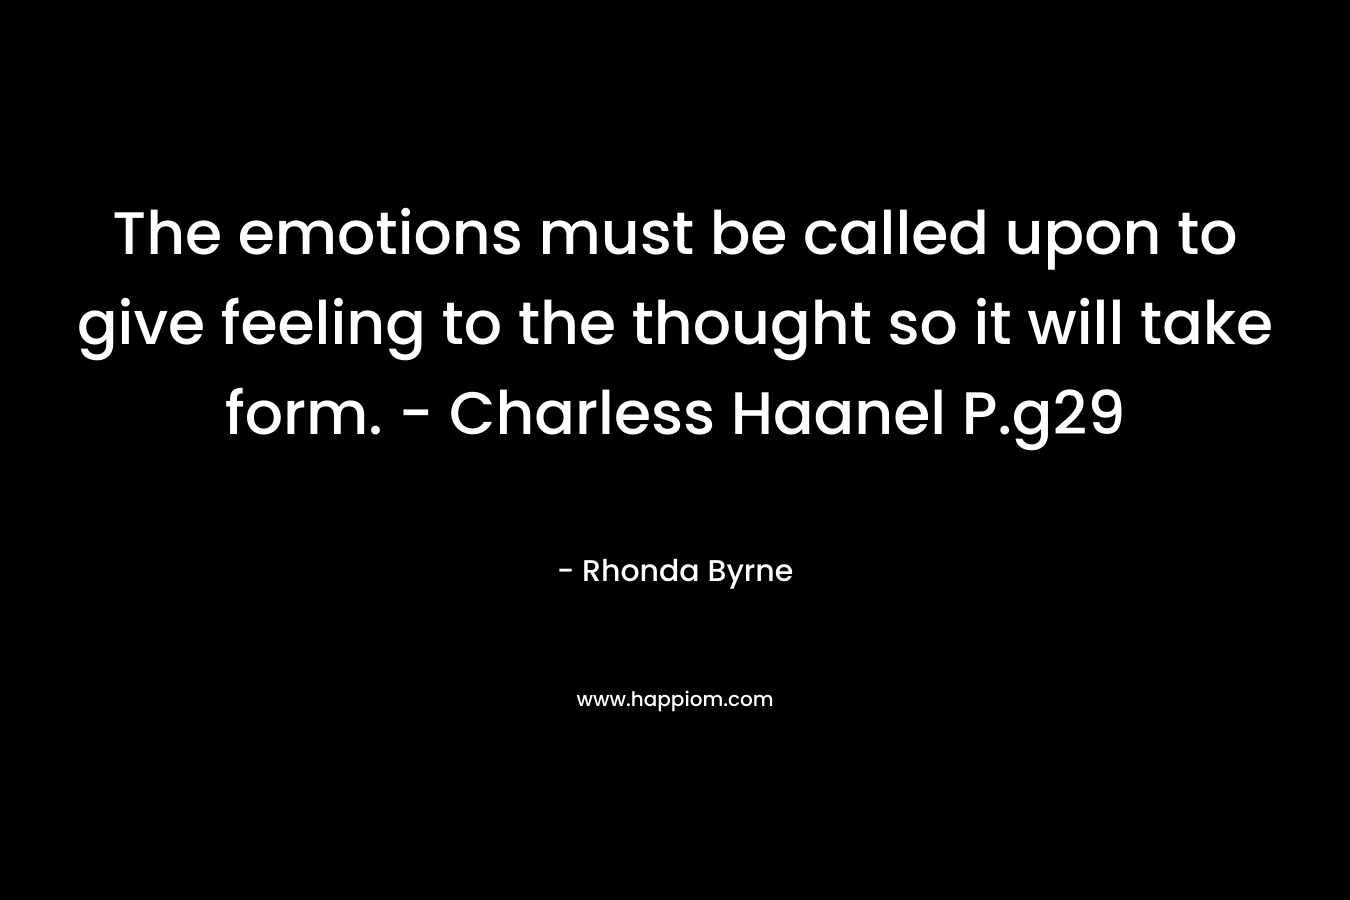 The emotions must be called upon to give feeling to the thought so it will take form. – Charless Haanel P.g29 – Rhonda Byrne